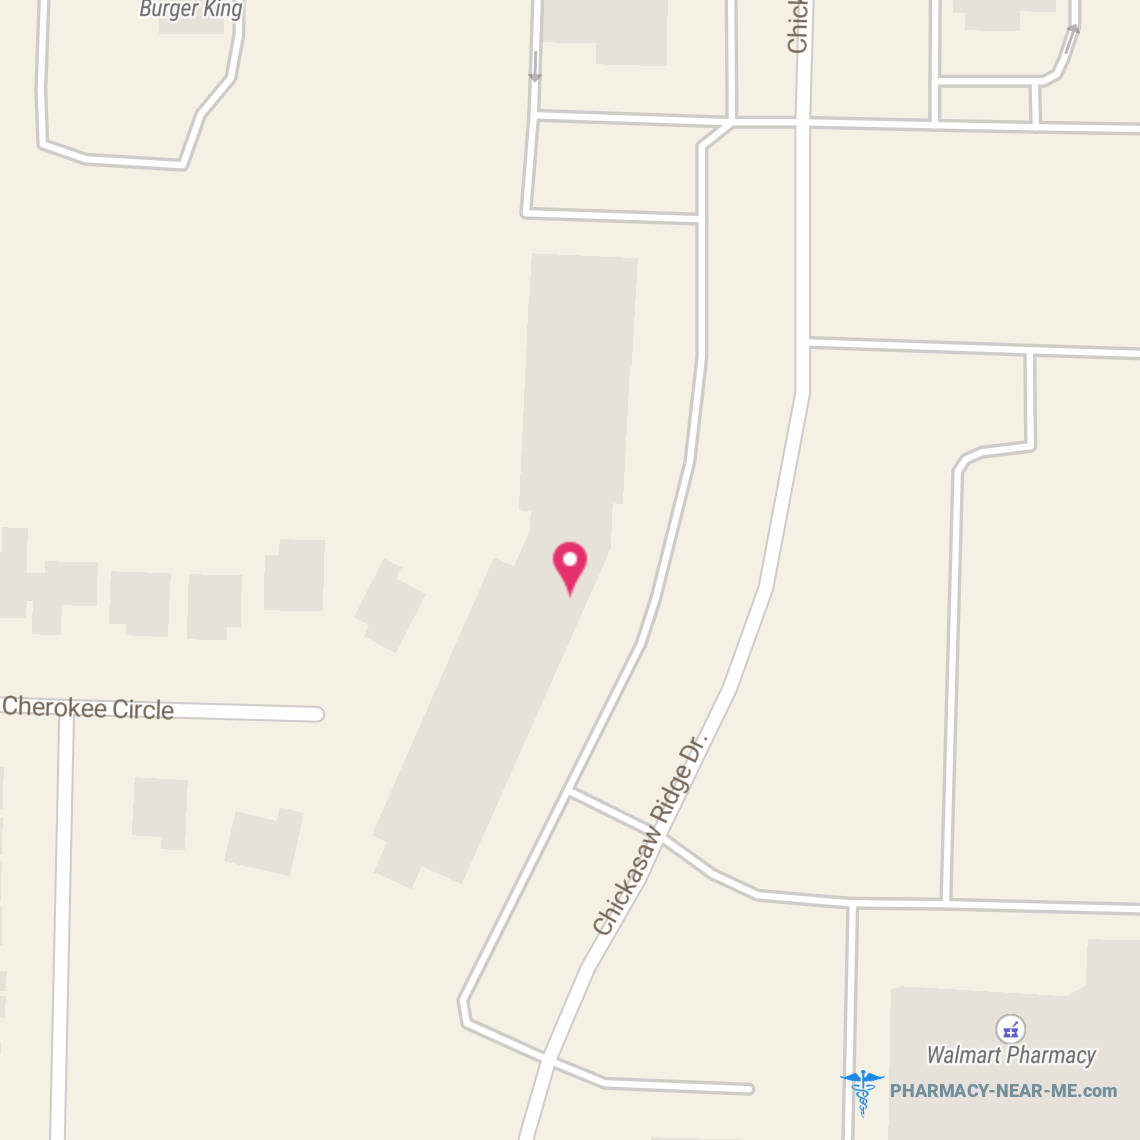 BETTERX - Pharmacy Hours, Phone, Reviews & Information: 200 Chickasaw Ridge Drive, Oakland, Tennessee 38060, United States